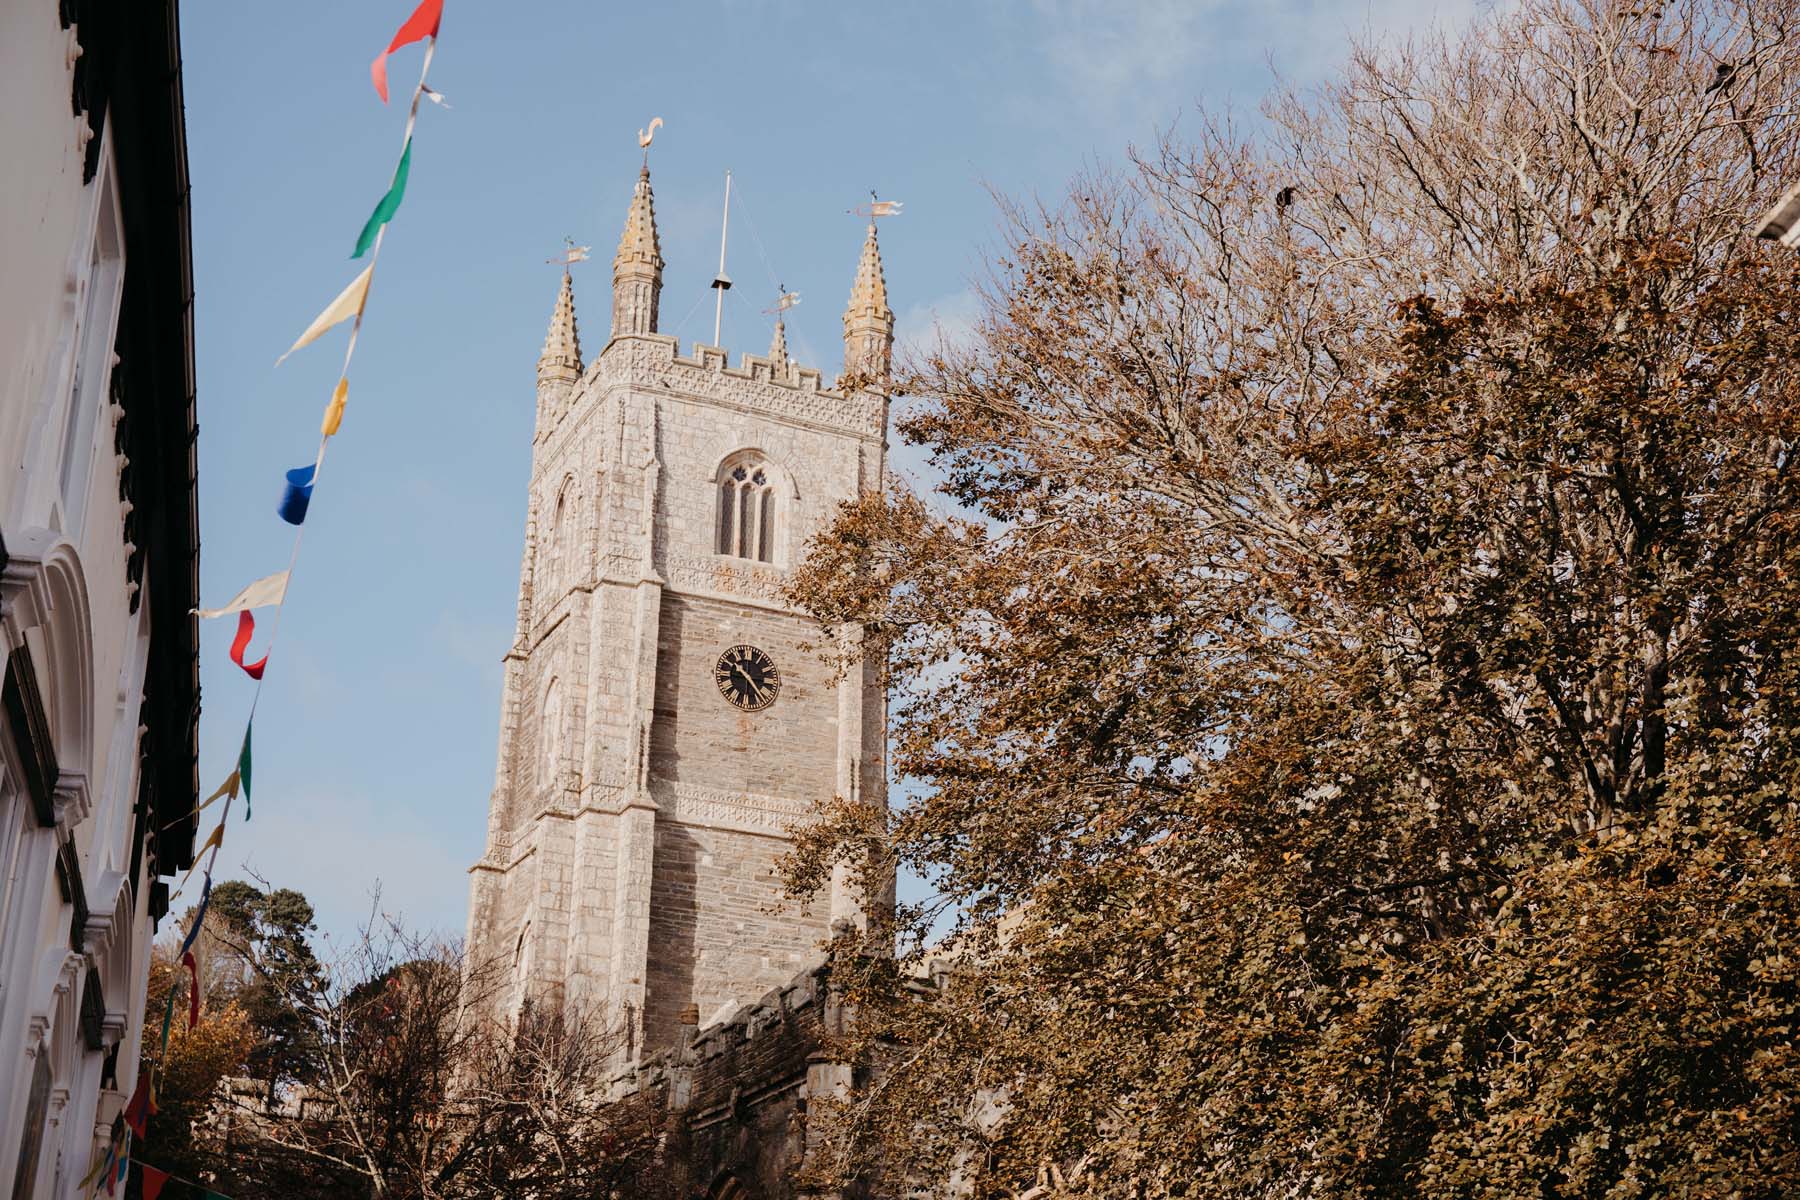 Church tower with flag bunting